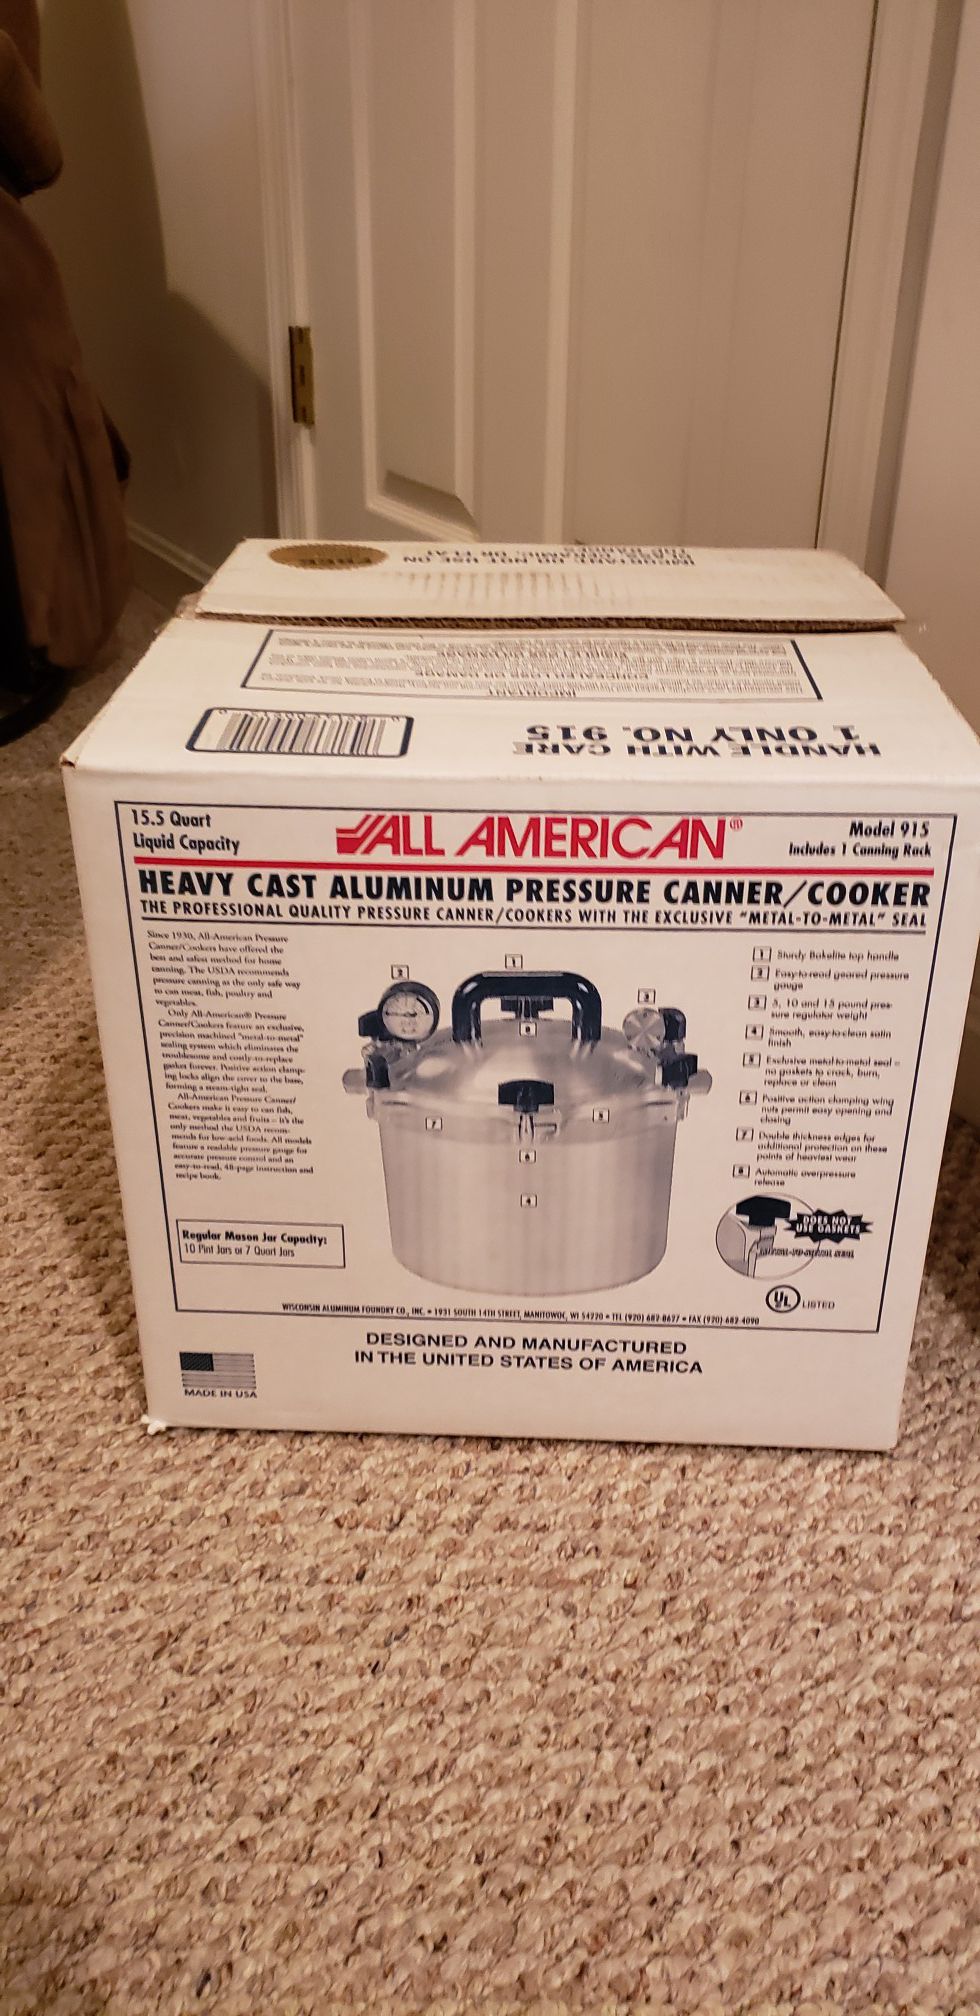 Heavy duty pressure/canner cooker